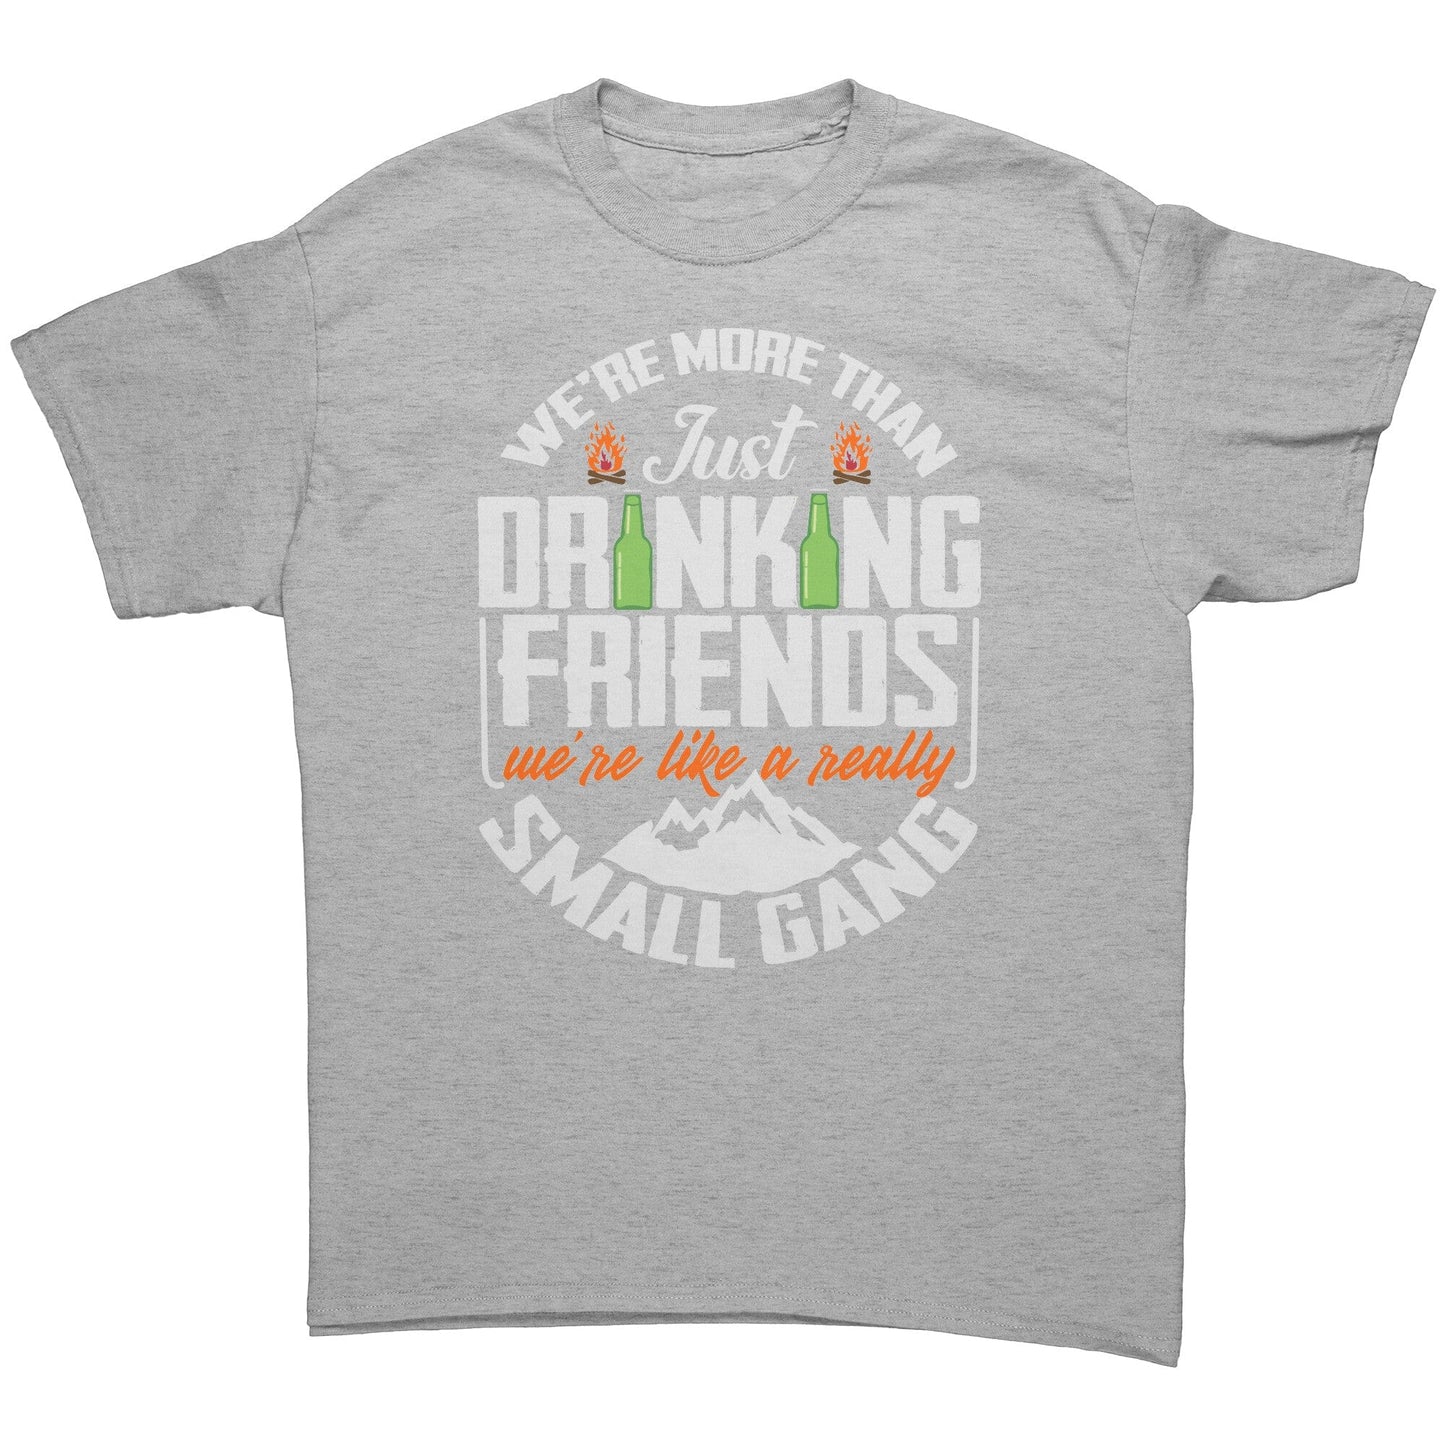 Funny "We're More Than Just Drinking Friends - We're Like A Really Small Gang" - Shirt